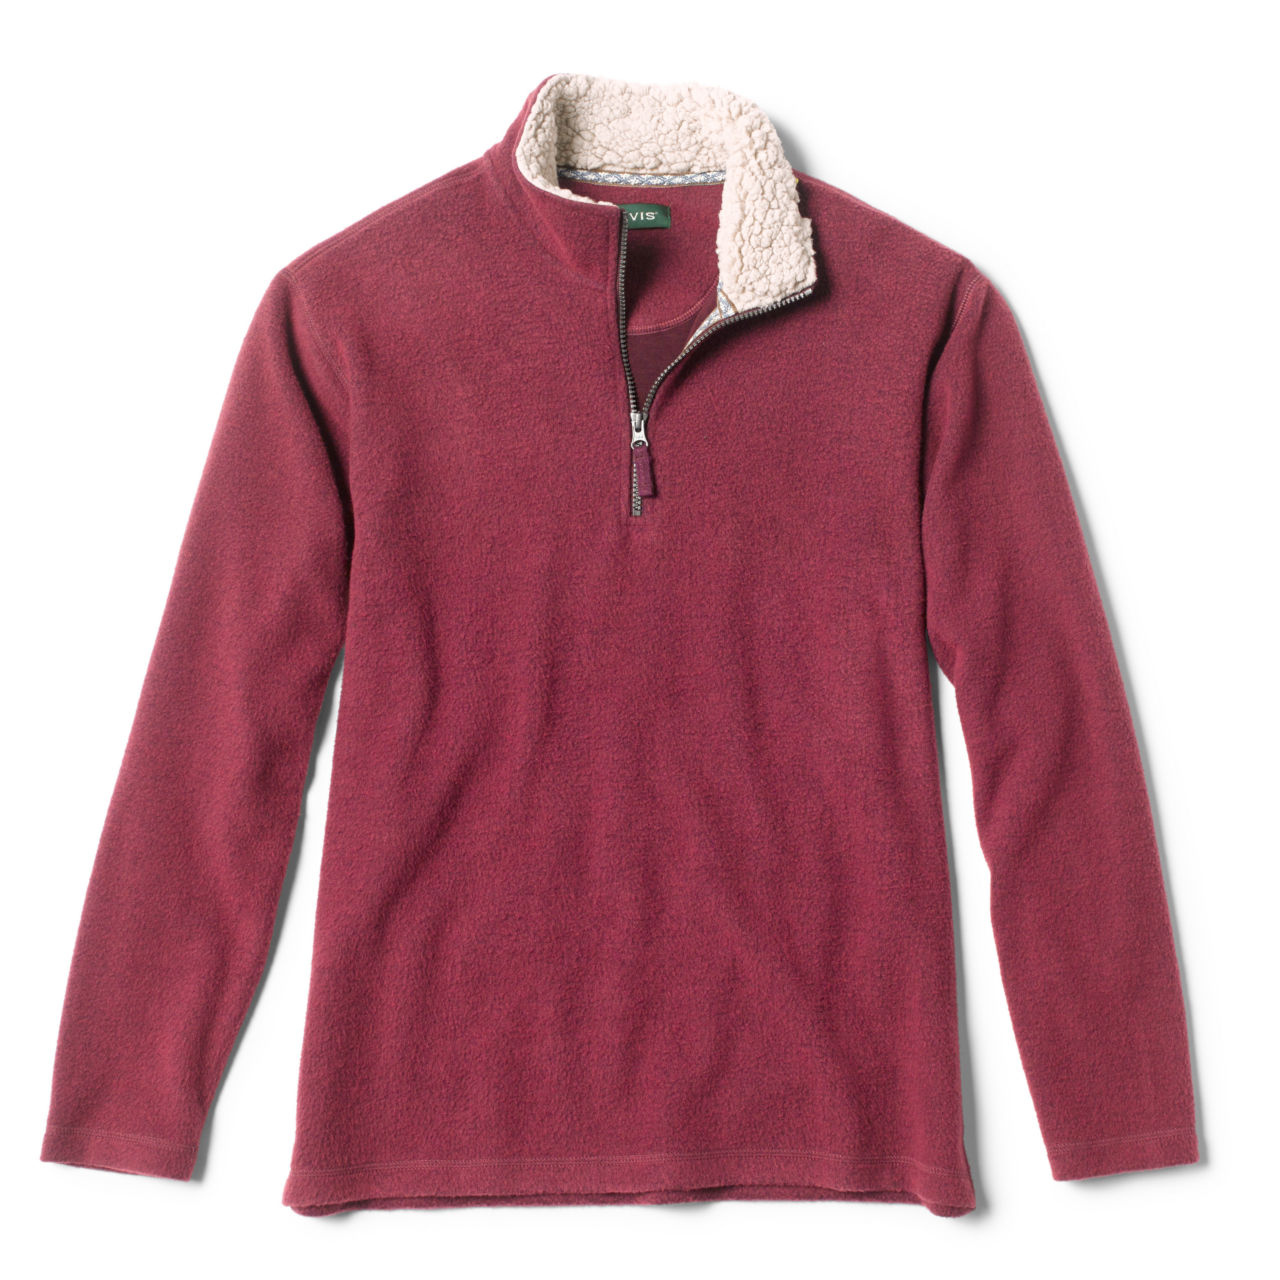 Mountain View Quarter-Zip Pullover - PORT image number 1